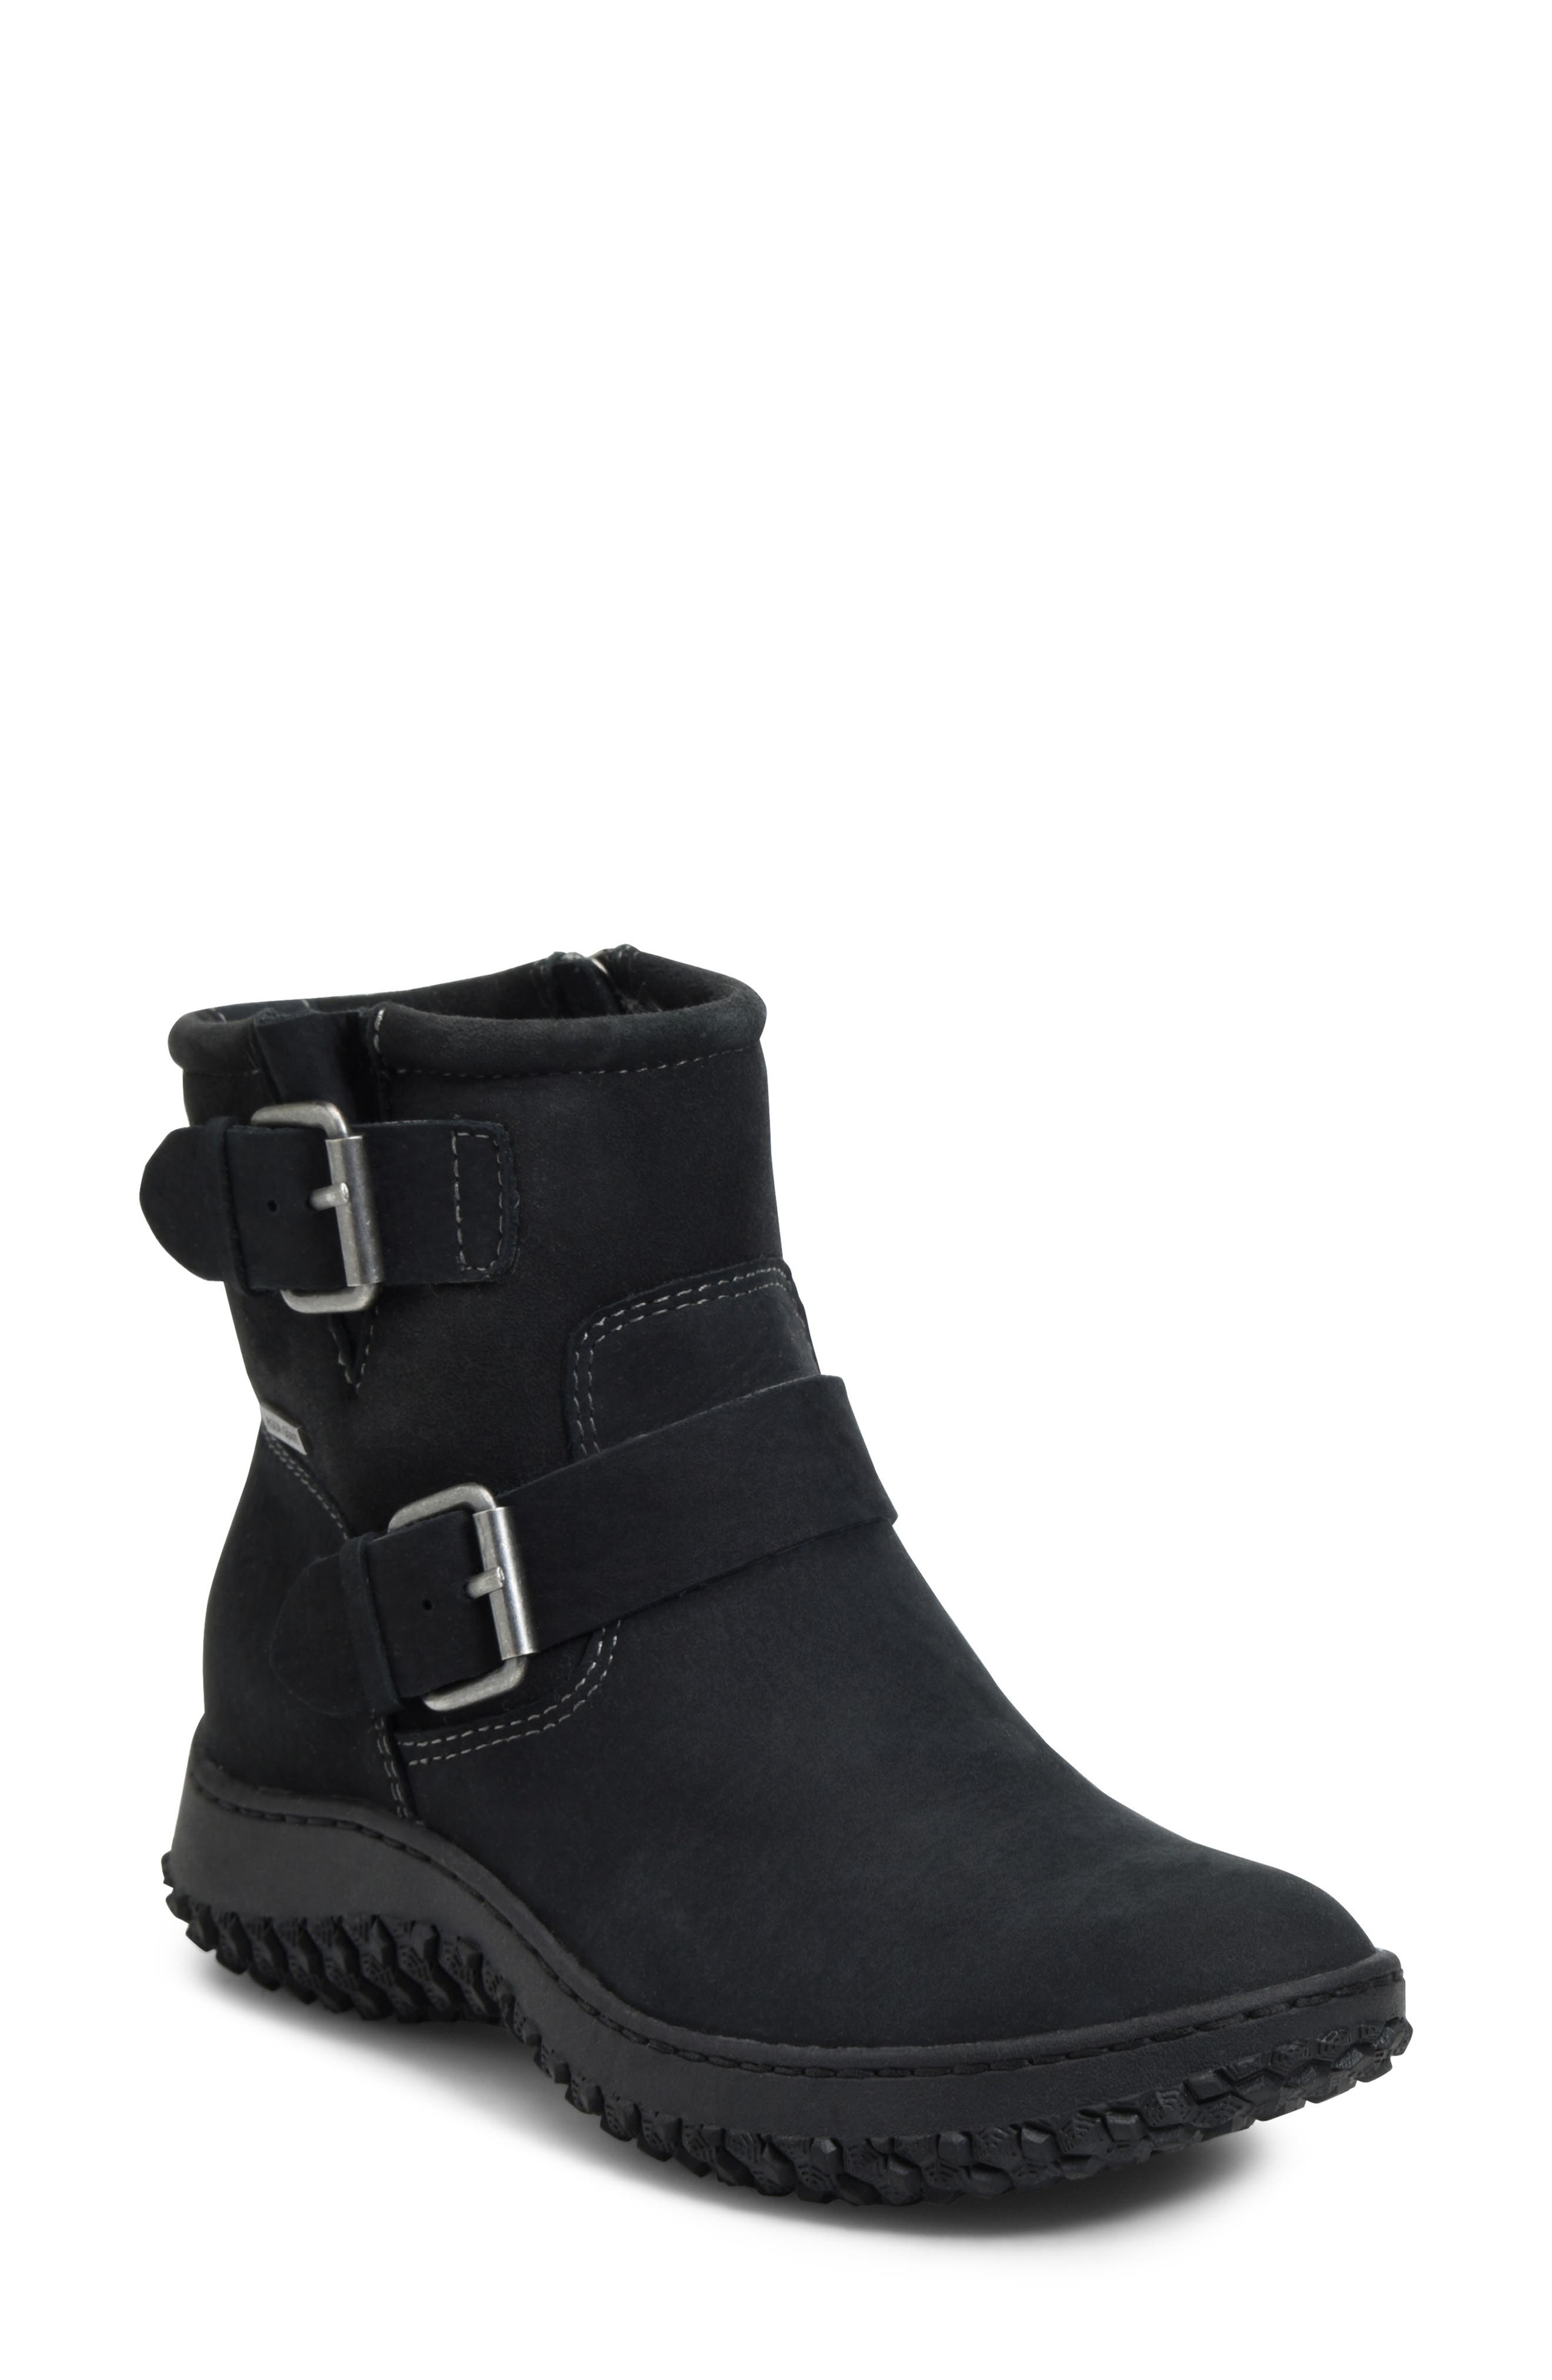 sofft black boots